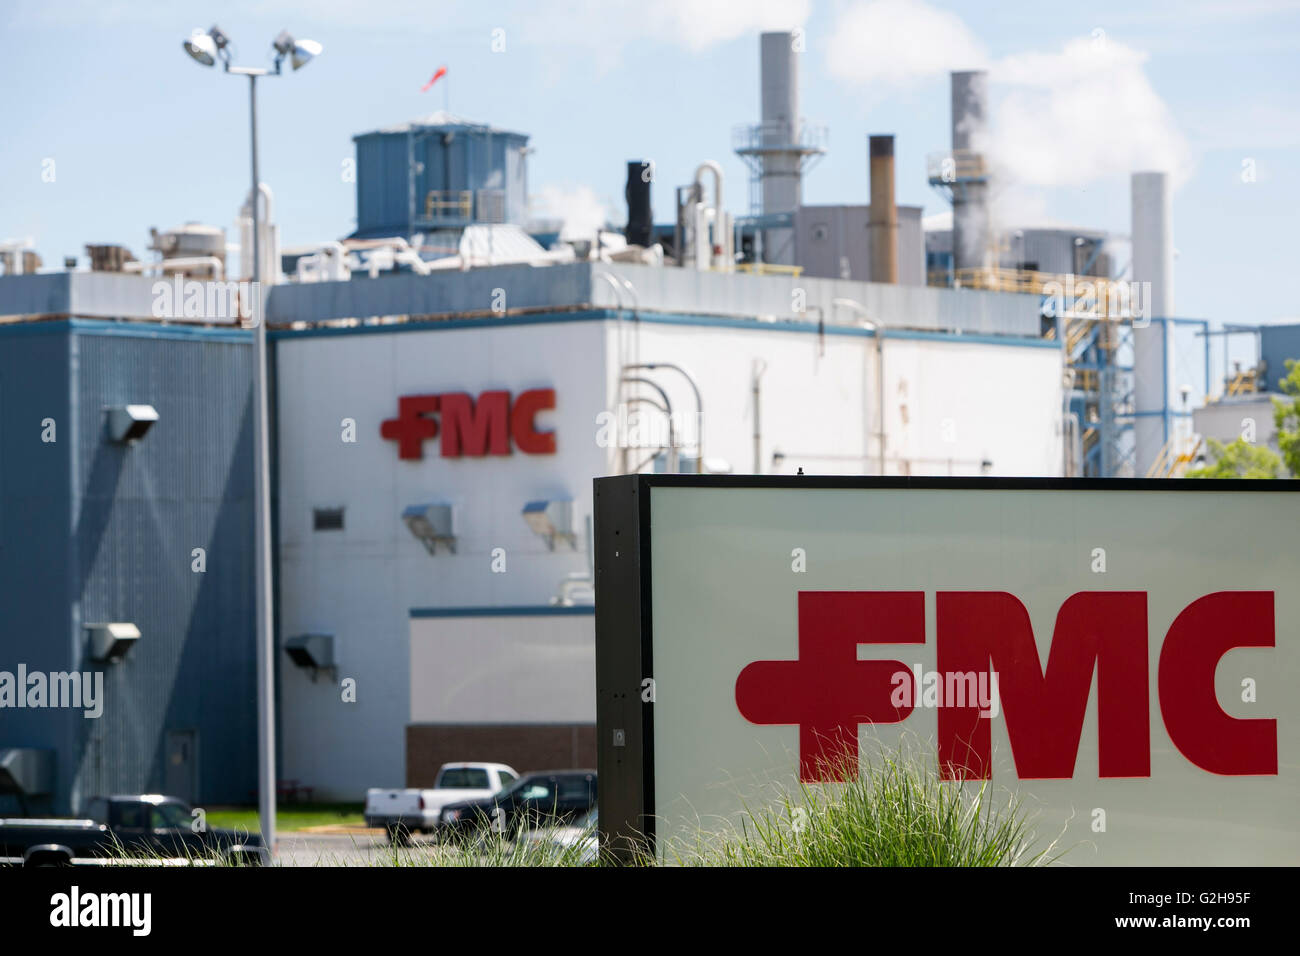 A logo sign outside of a FMC Corporation BioPolymer plant in Newark, Delaware on May 8, 2016. Stock Photo